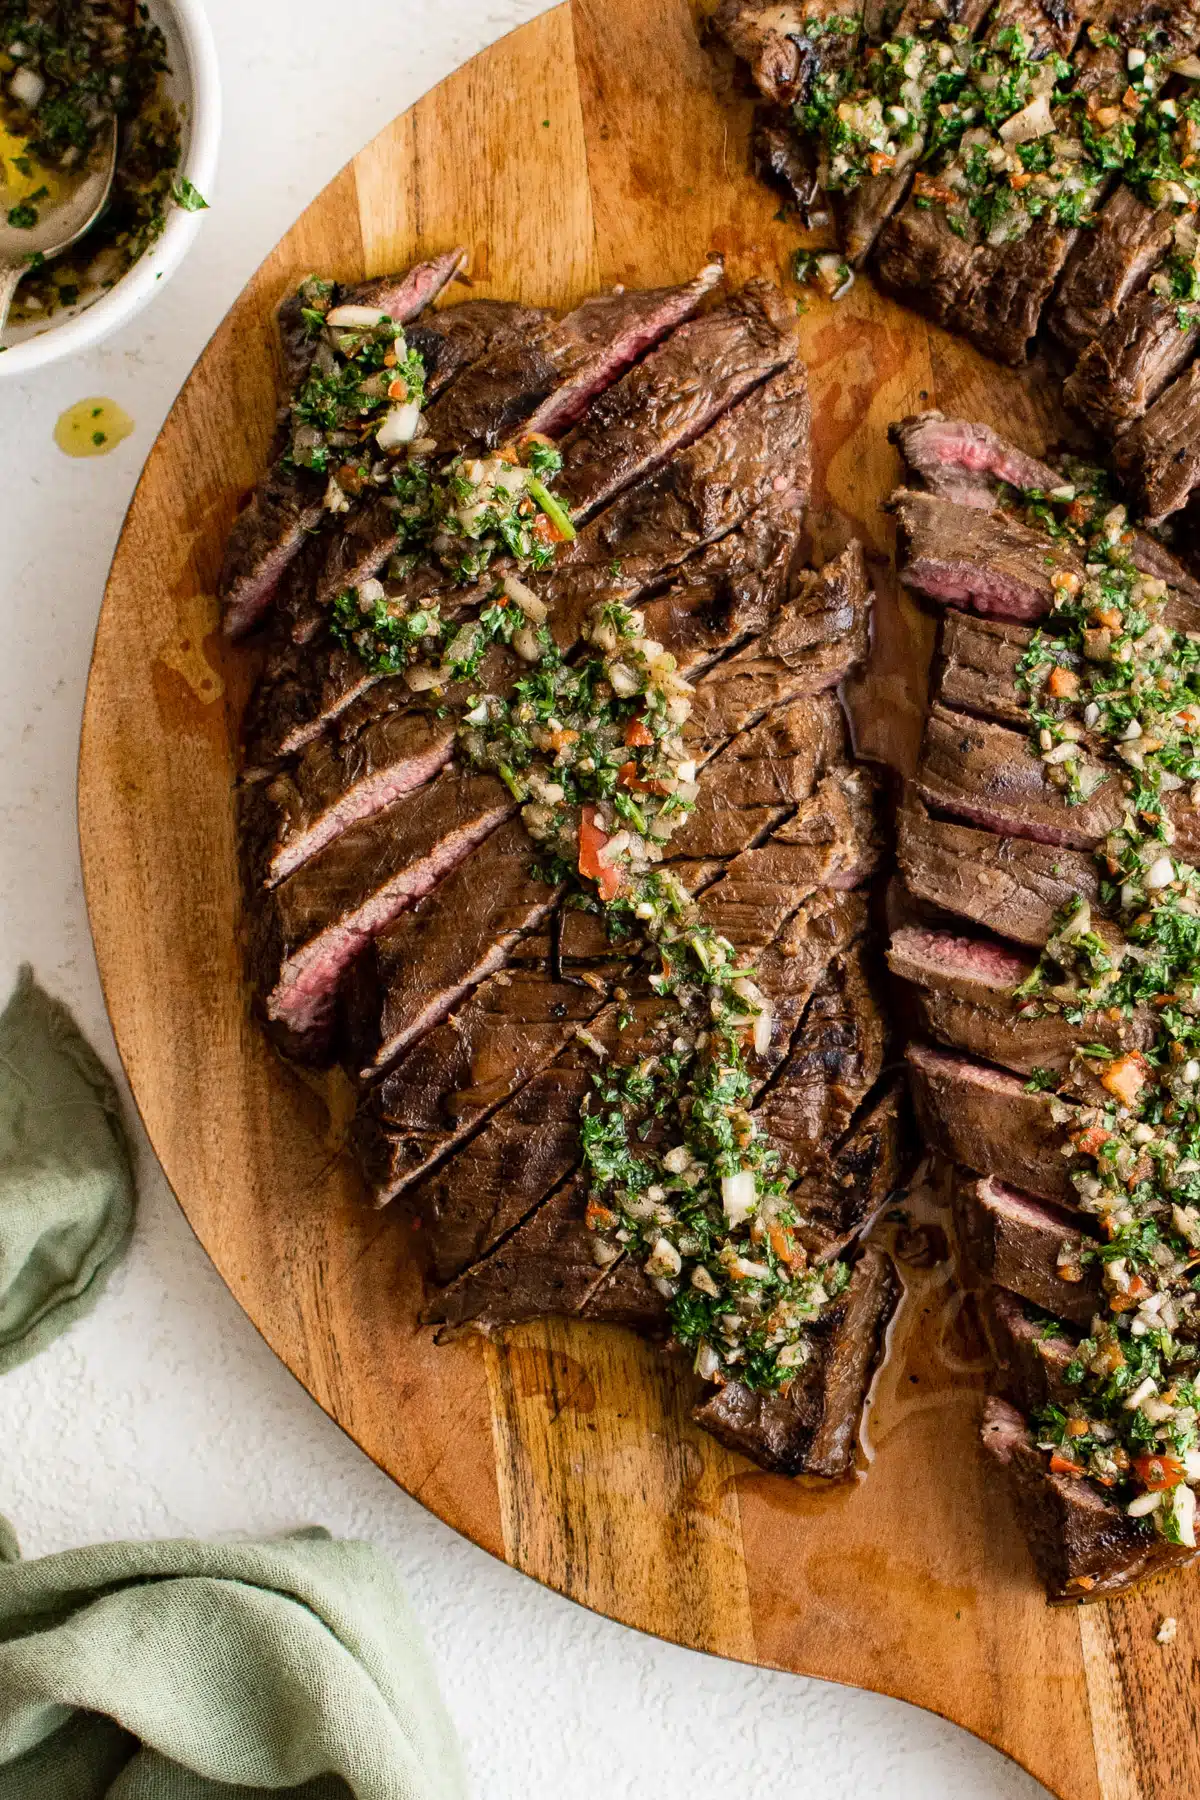 Thinly sliced marinated flank steak on a wooden cutting board topped with chimichurri sauce.